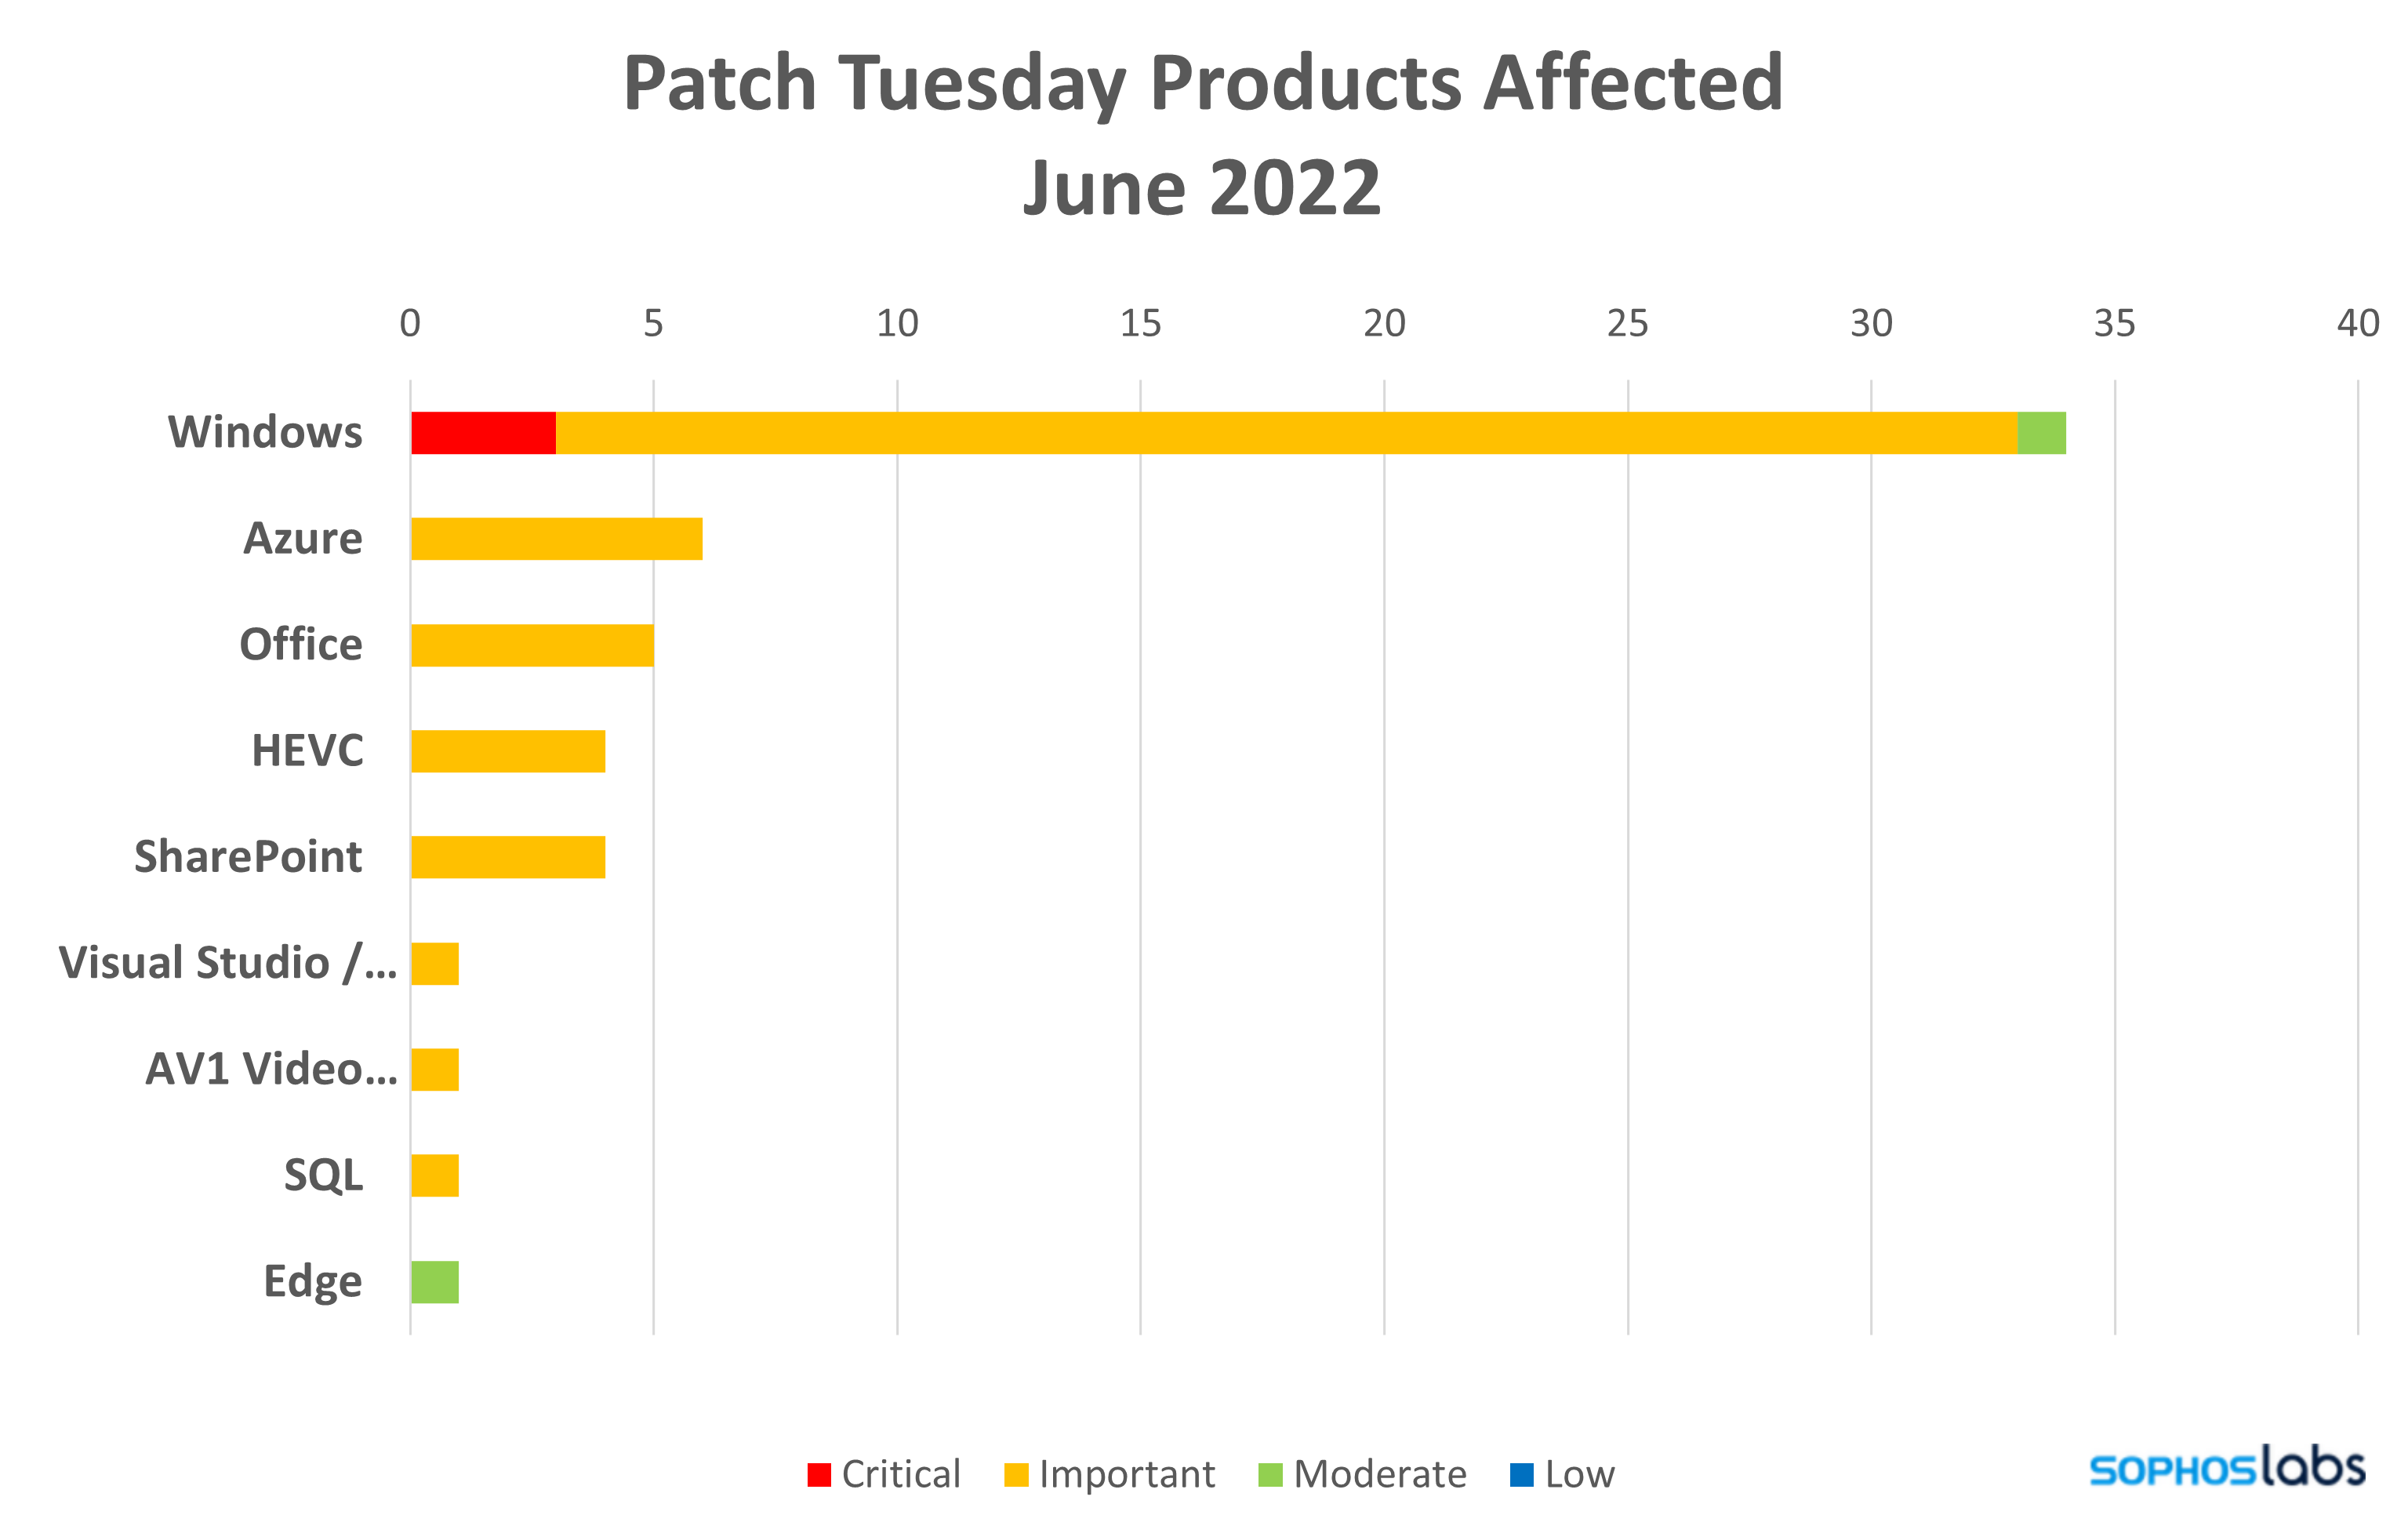 Product families affected by June 2022 patches